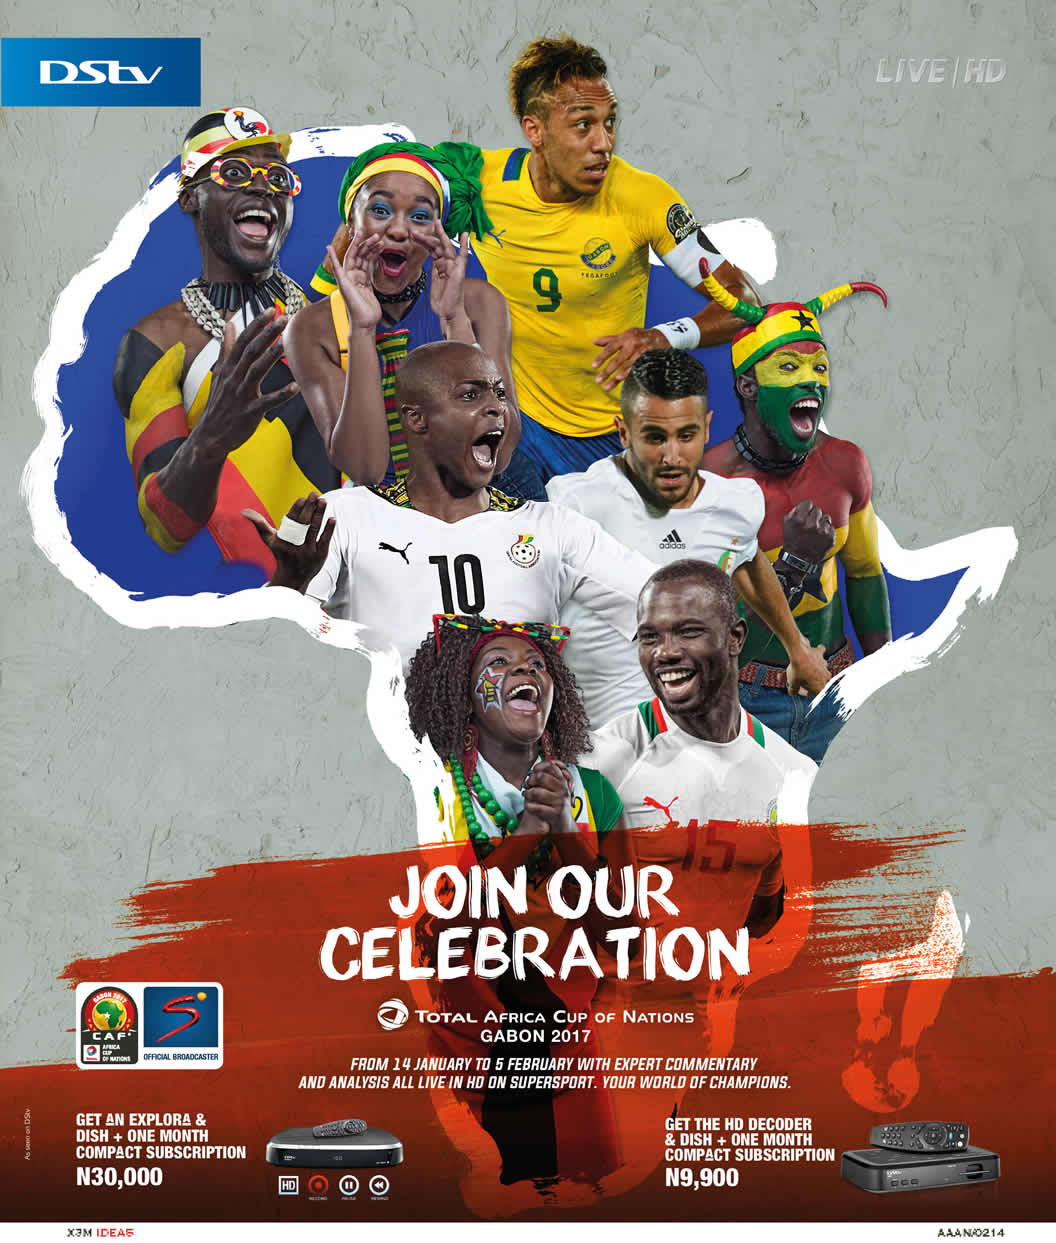 Enjoy Africa Football at its Best! AFCON 2017 is Here